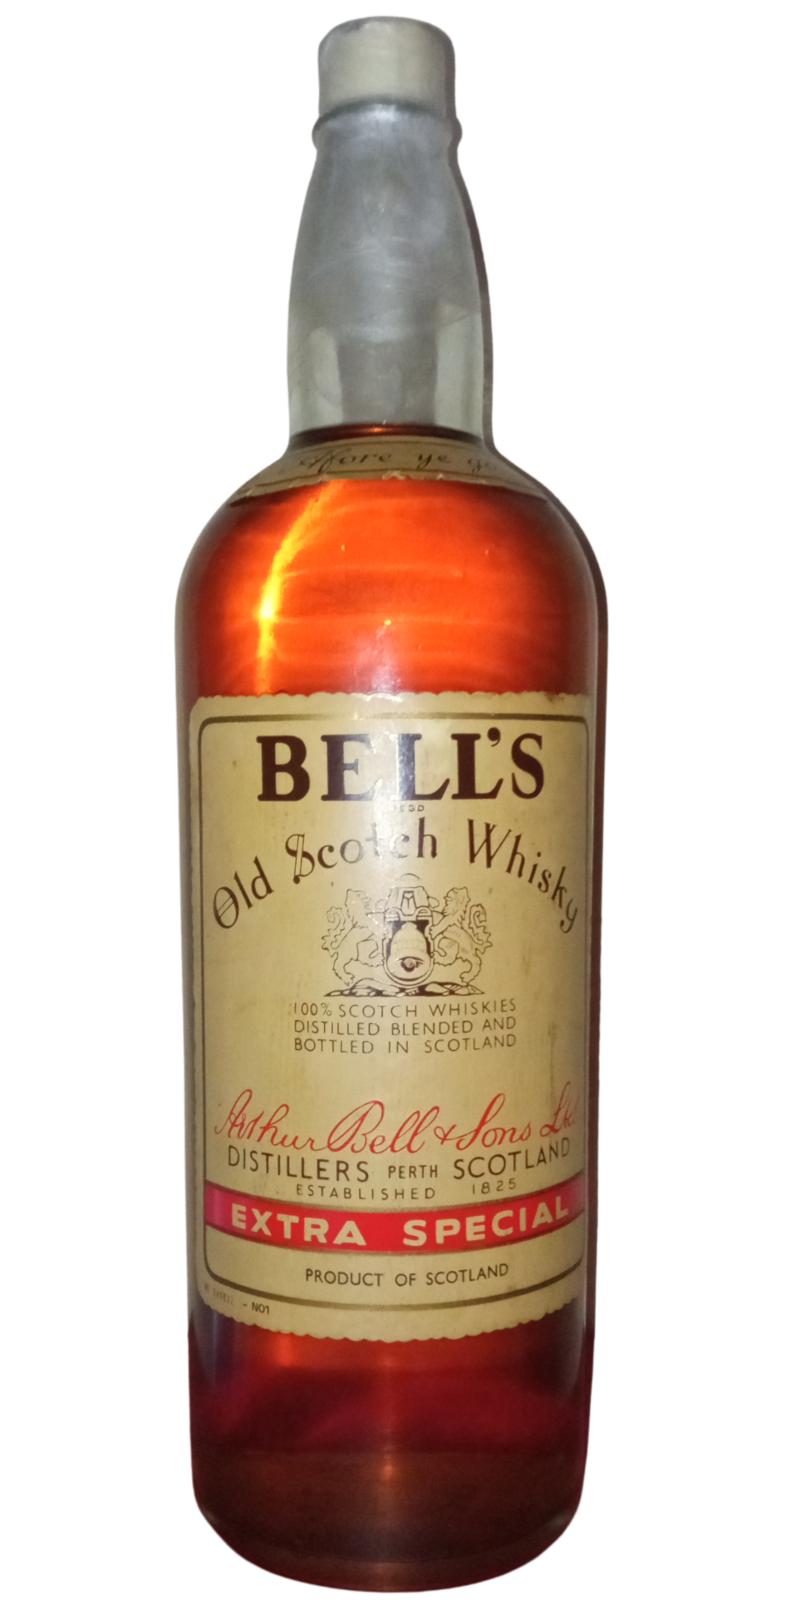 Bell's Old Scotch Whisky